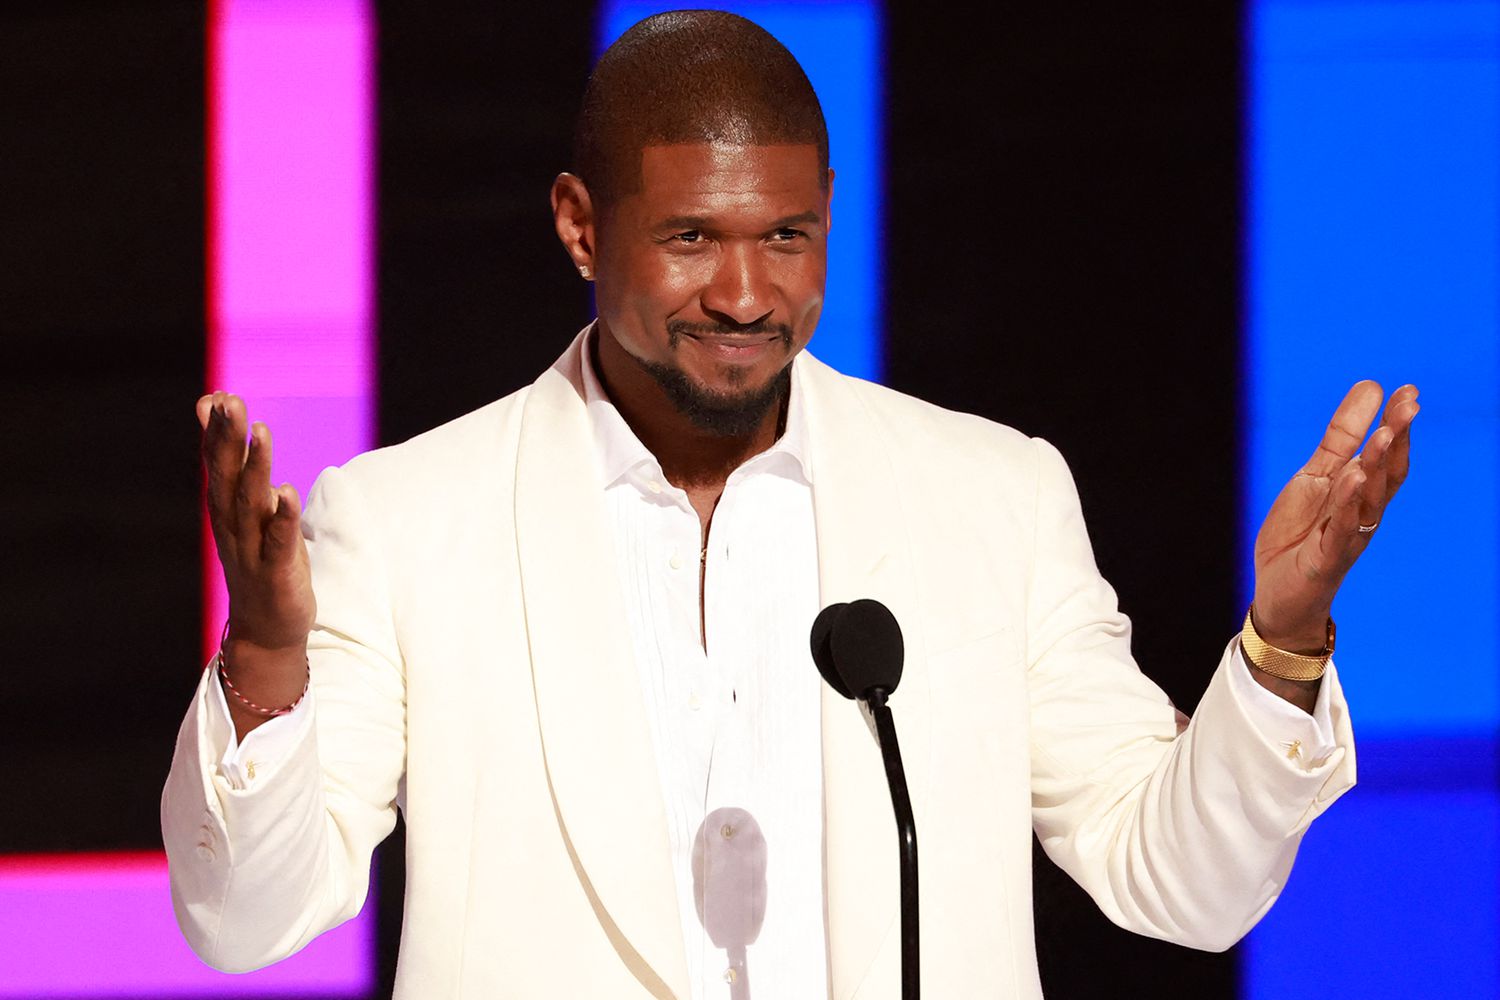 Usher and His Words on Family, Fatherhood and Forgiveness in BET Awards Lifetime Achievement Speech